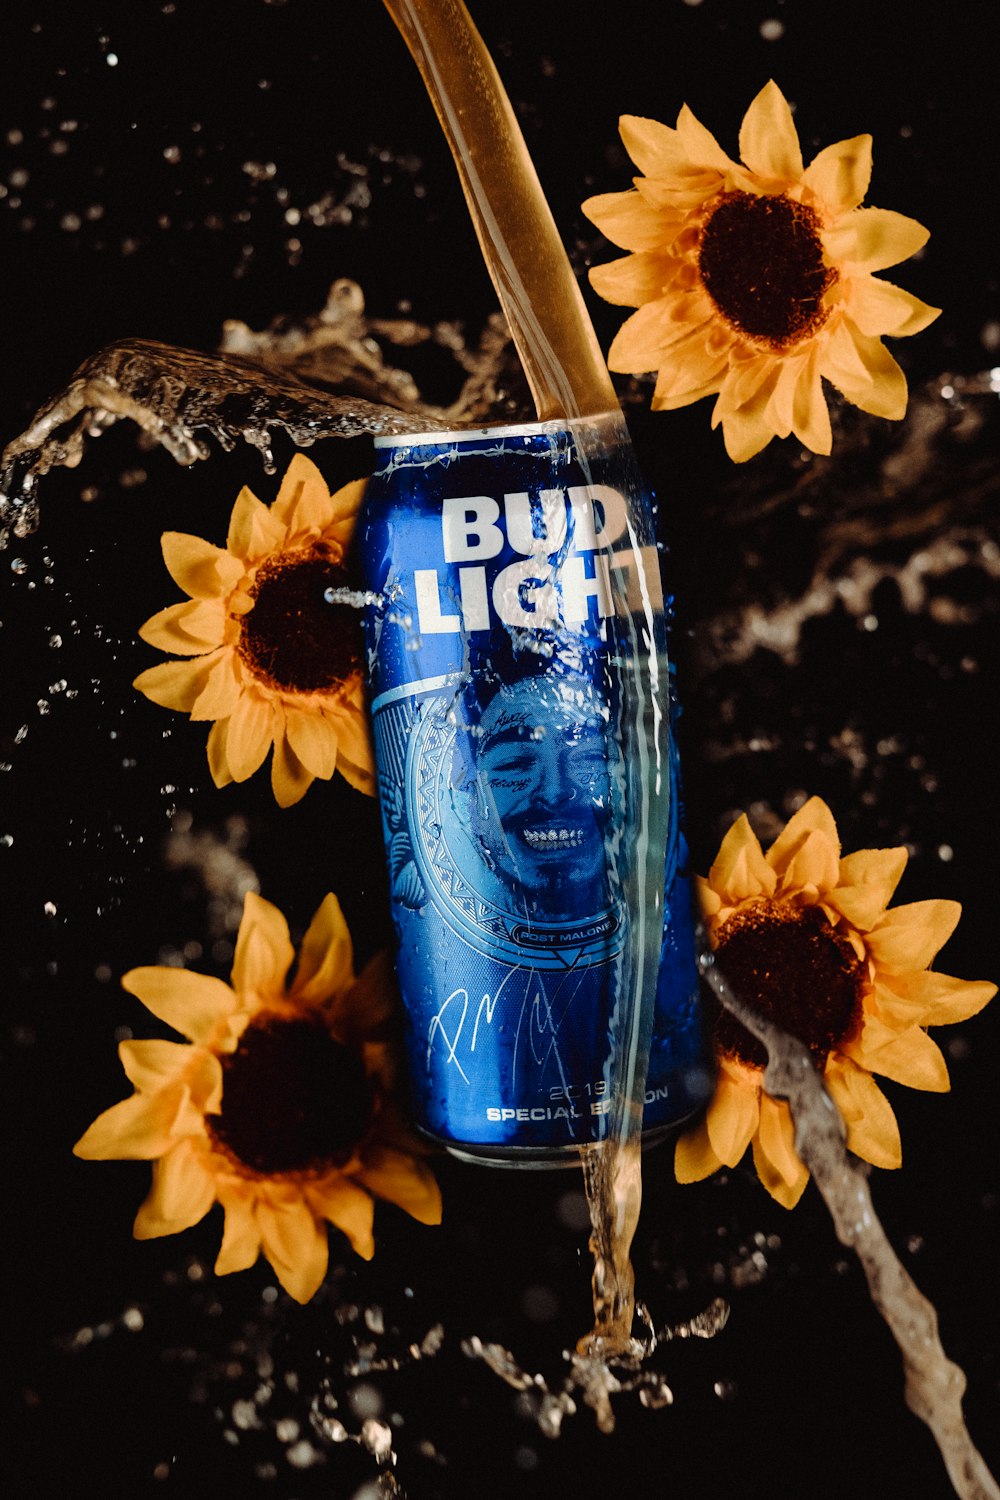 Bud Light beer can